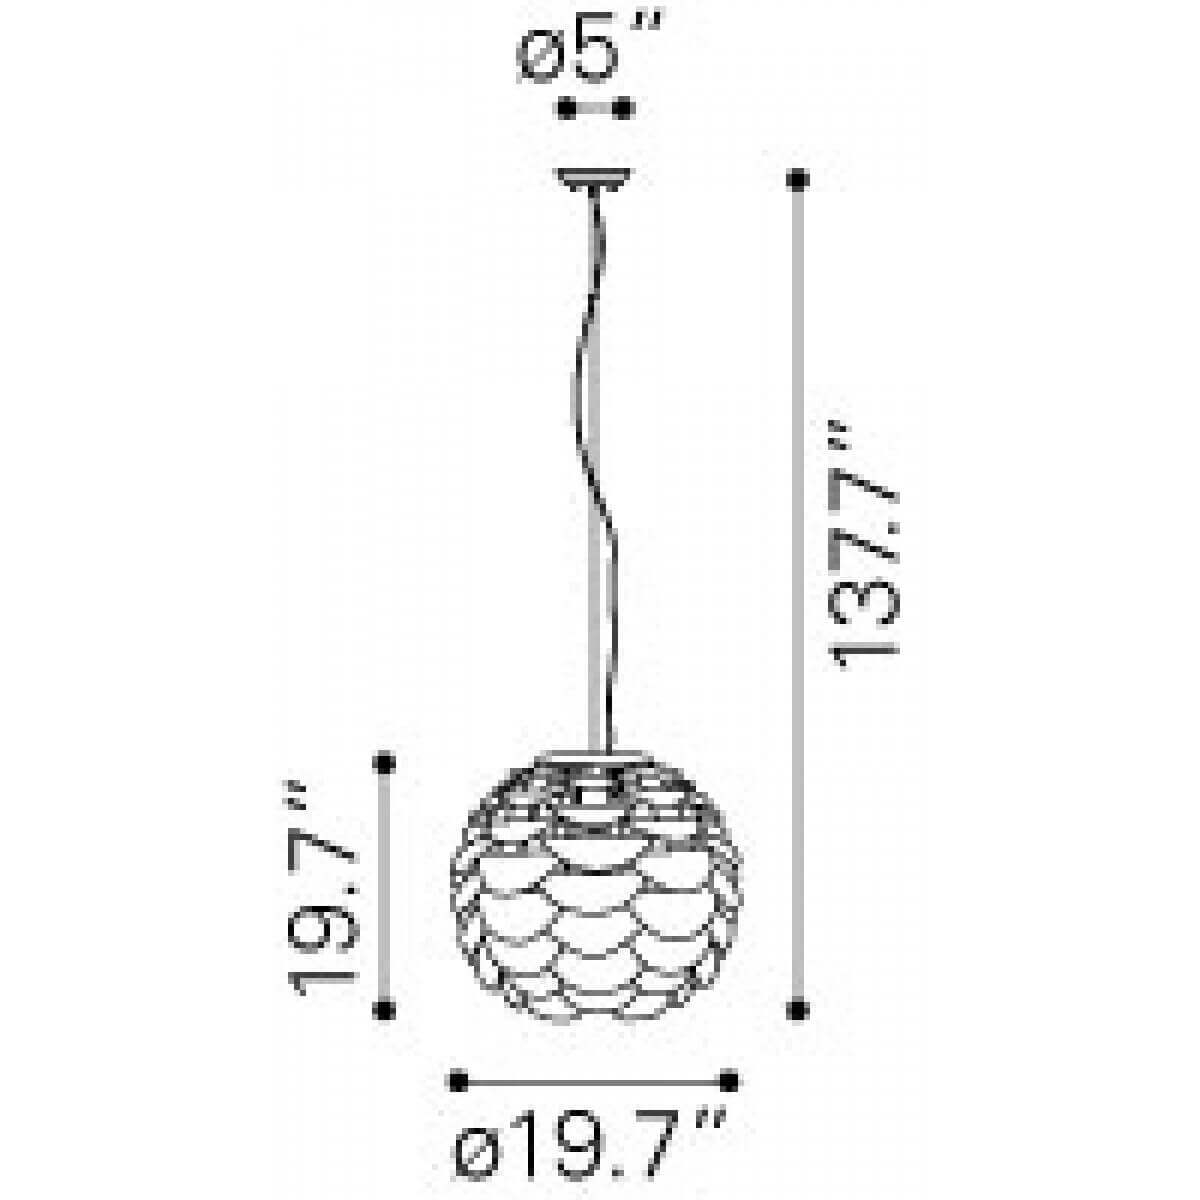 Contemporary light fixtures dimensions view